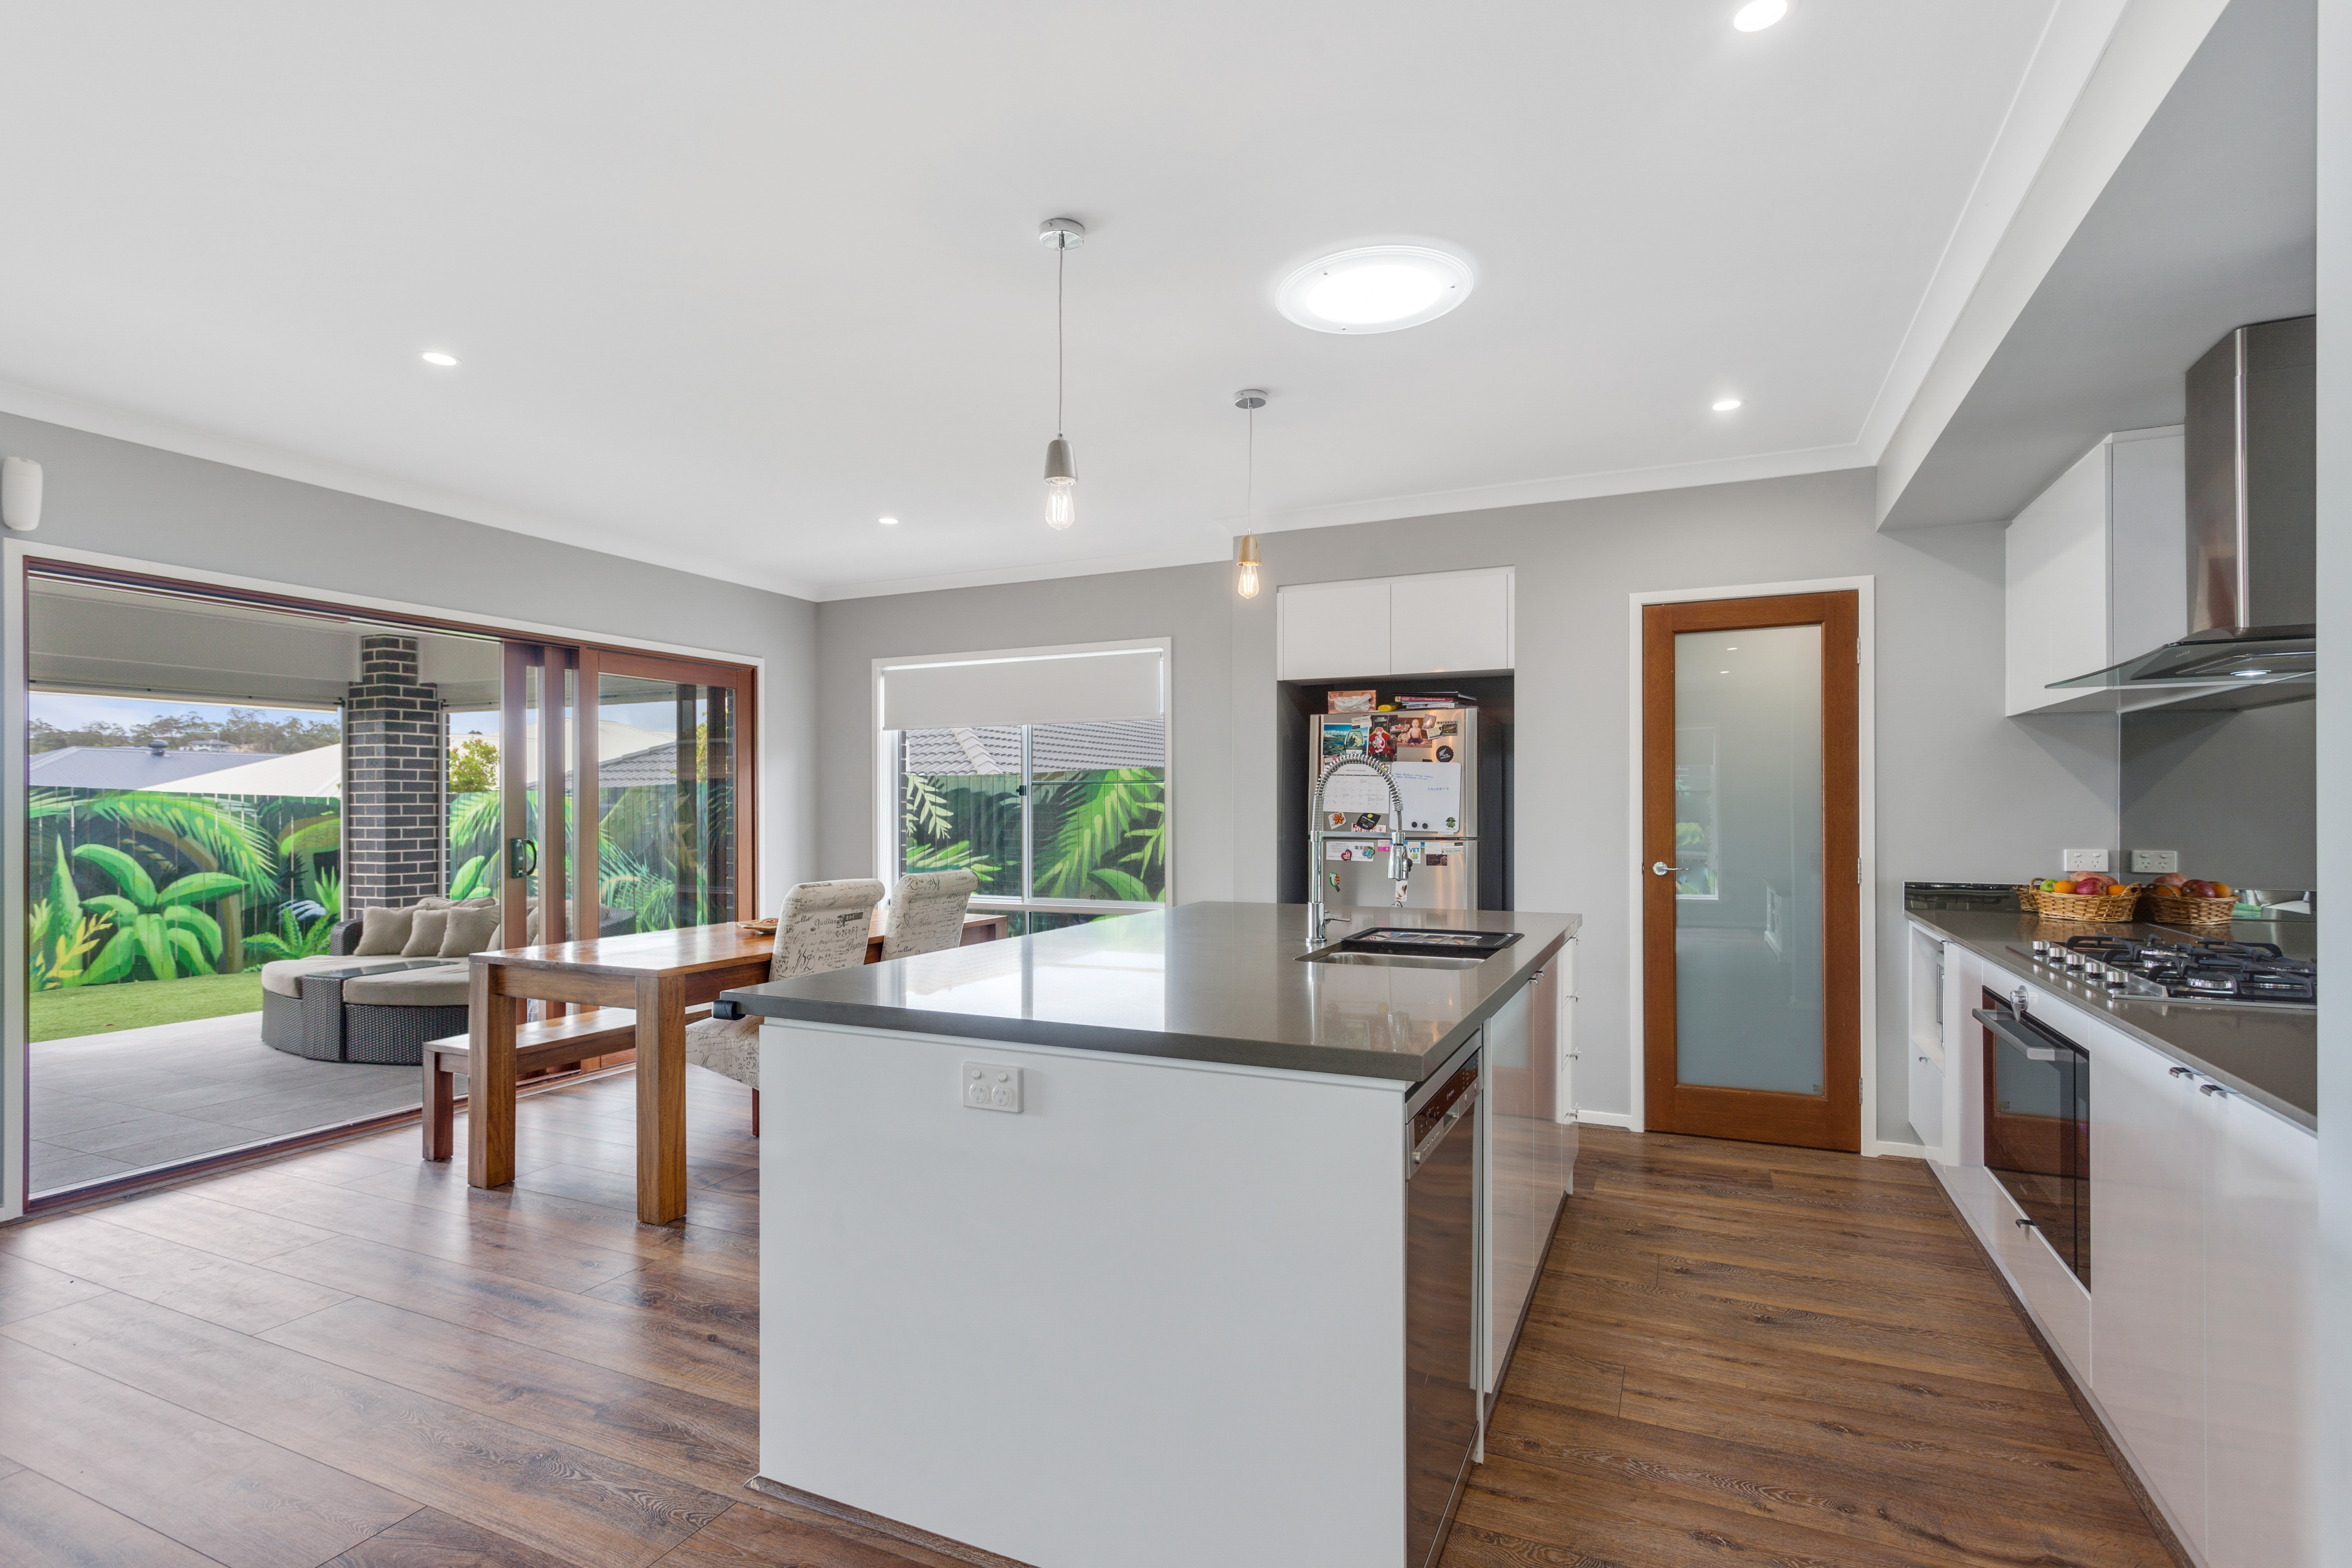 INSIDE GLIMPSE ON PROPERTY RENTALS IN ORMEAU HILLS BY MICHELLE OSMOND, LEADING PROPERTY MANAGEMENT EXECUTIVE IN ORMEAU HILLS